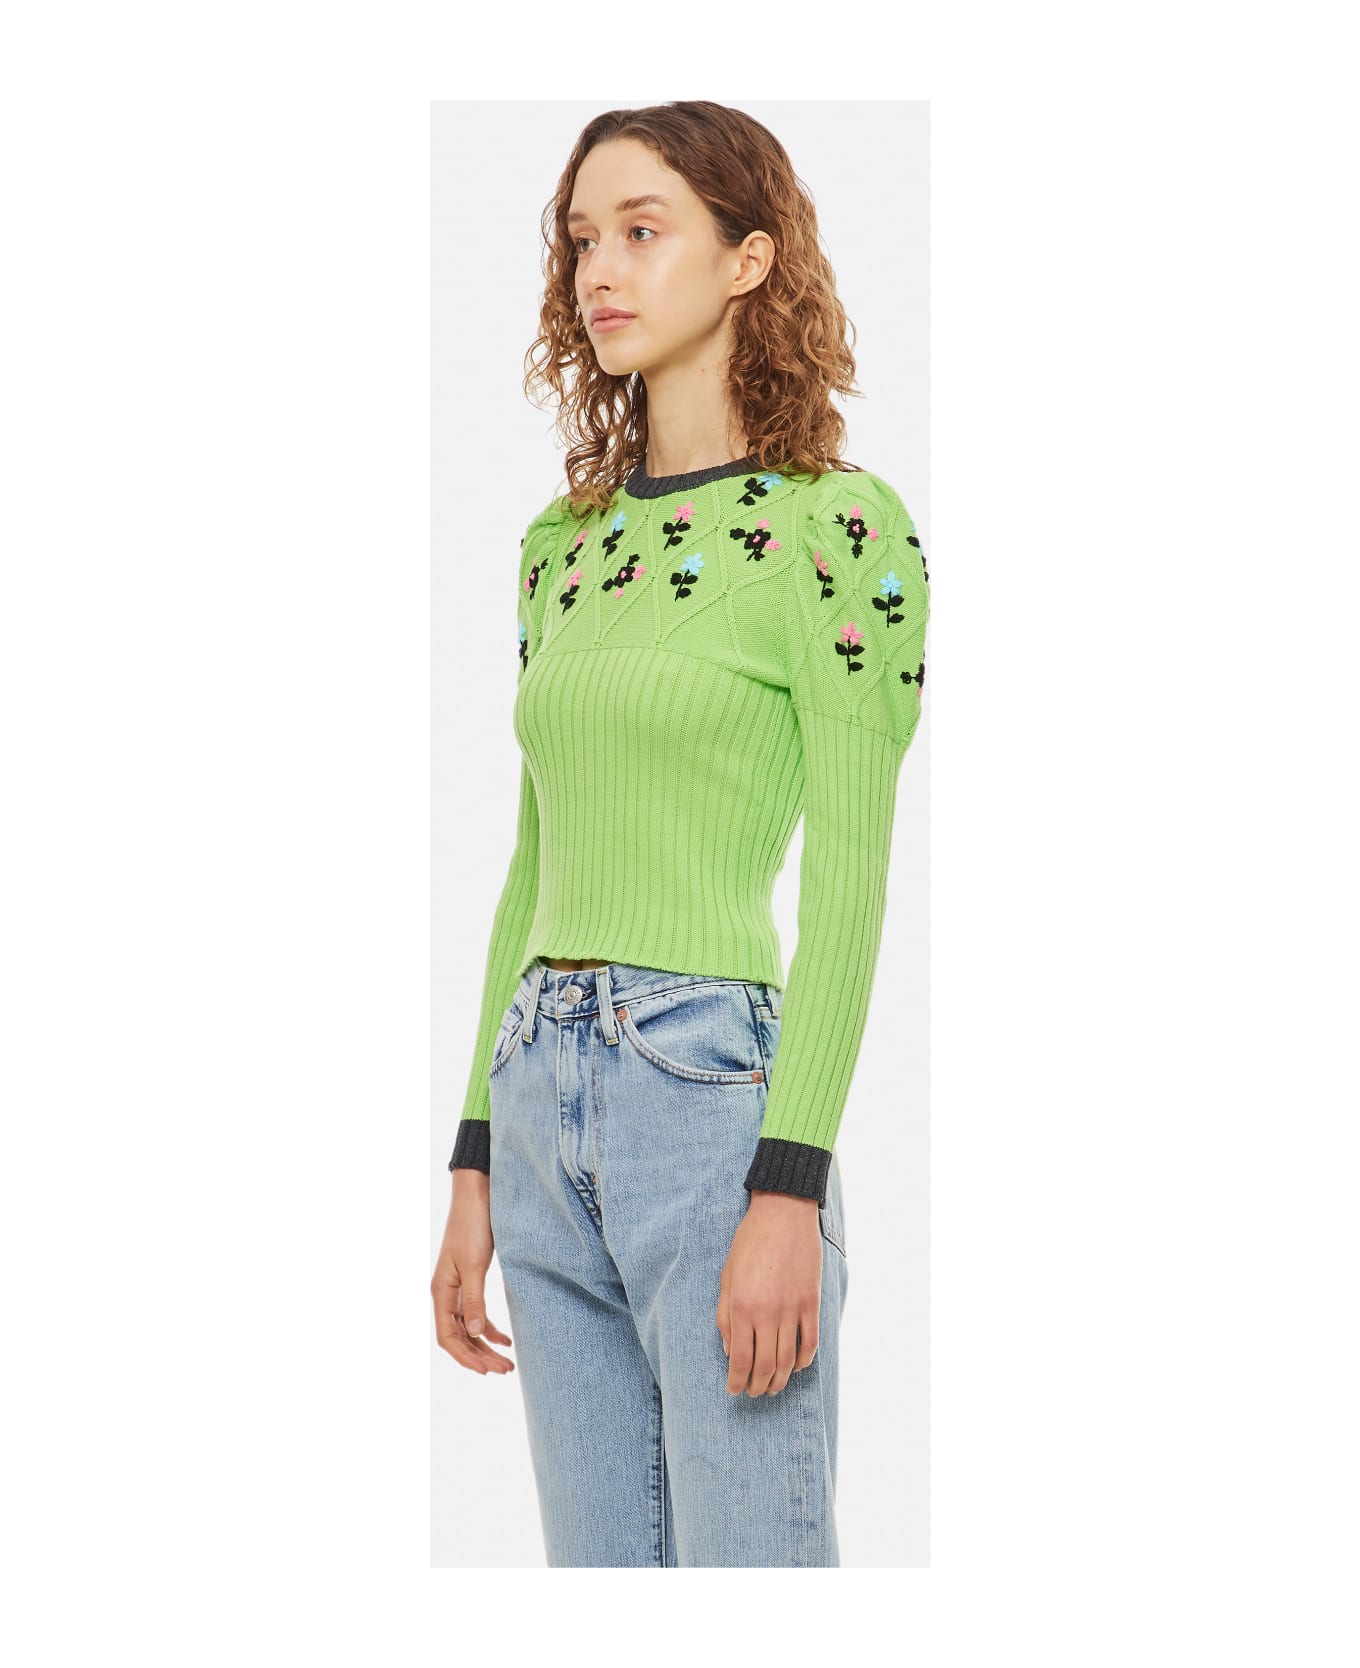 Cormio Oma Cotton Sweater With Embroidery - Green